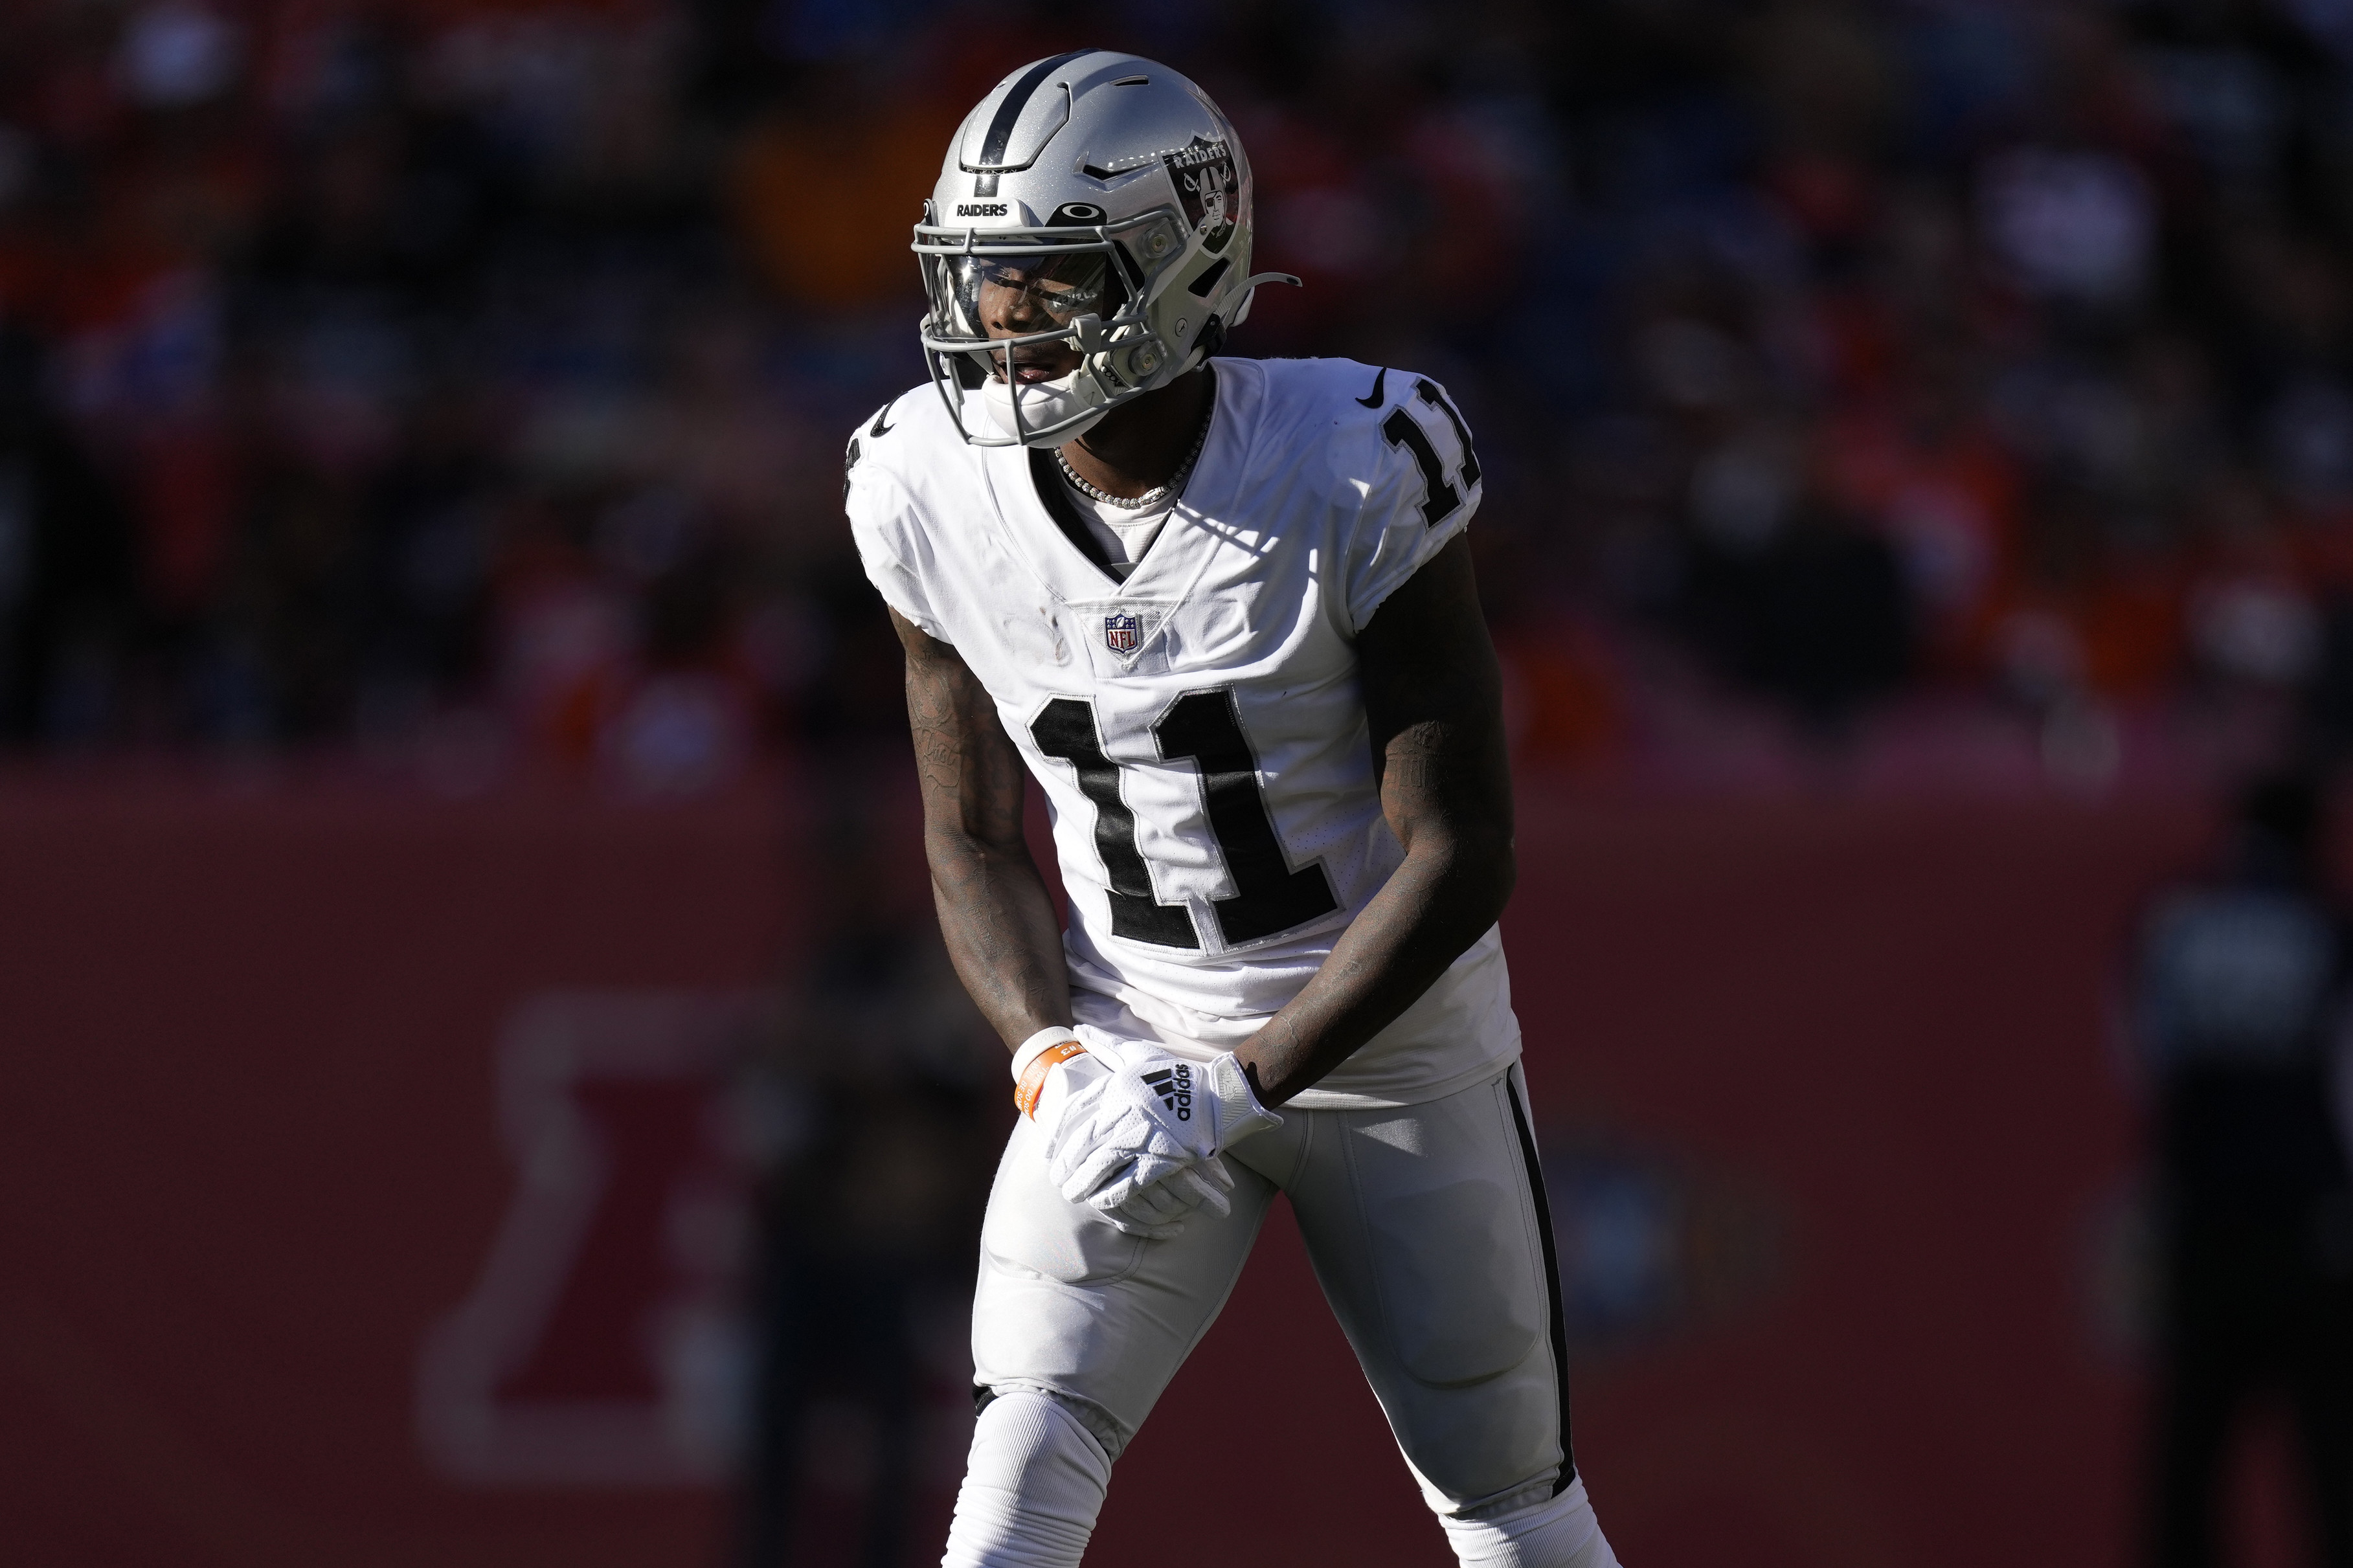 Raiders' Henry Ruggs III to Be Charged with DUI Resulting in Death After Car Crash